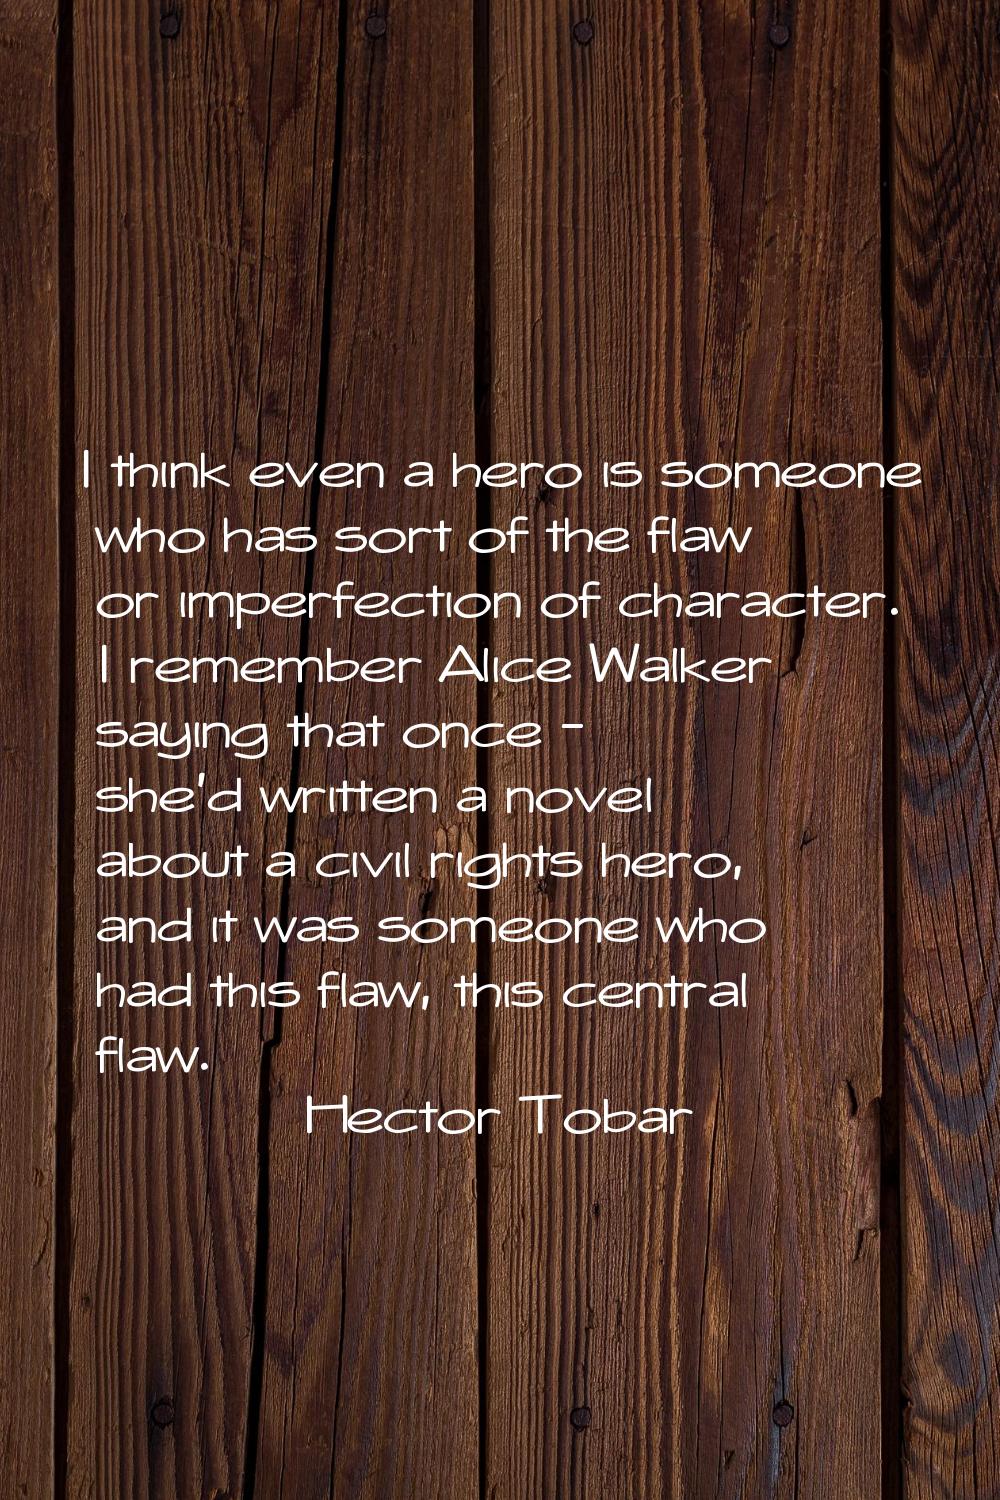 I think even a hero is someone who has sort of the flaw or imperfection of character. I remember Al